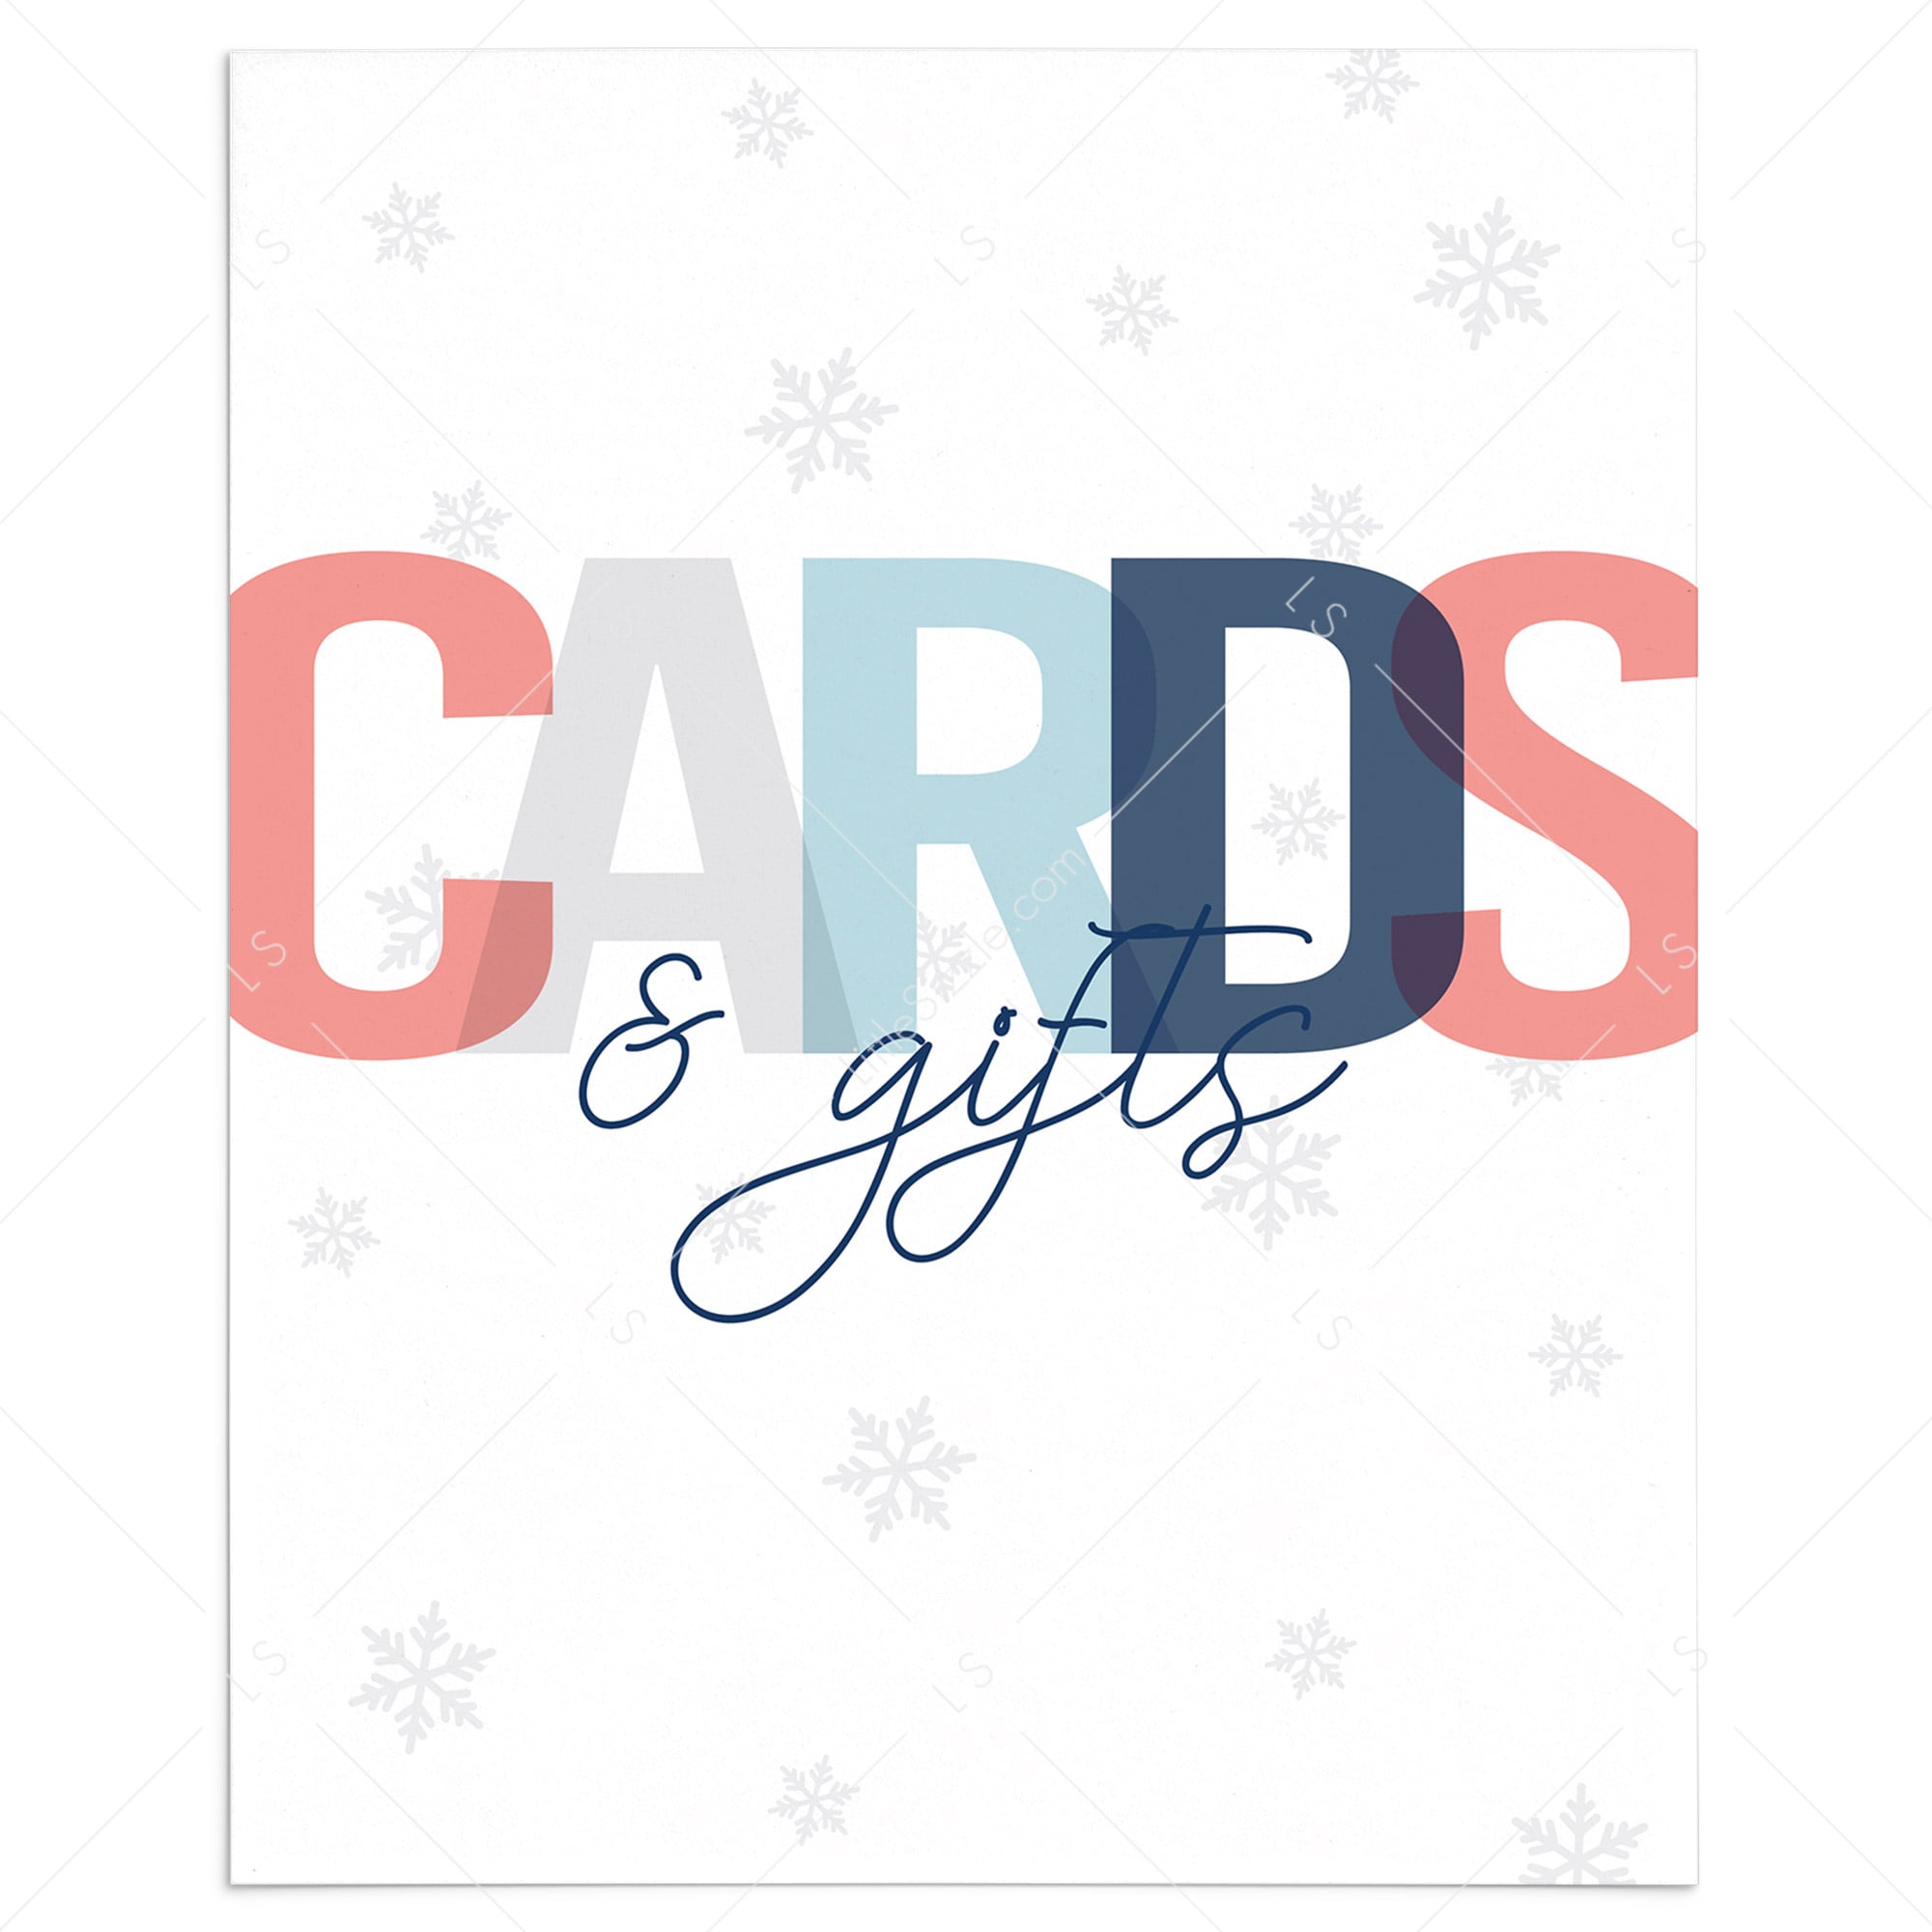 Blue and white winter themed cards and gifts sign printable by LittleSizzle